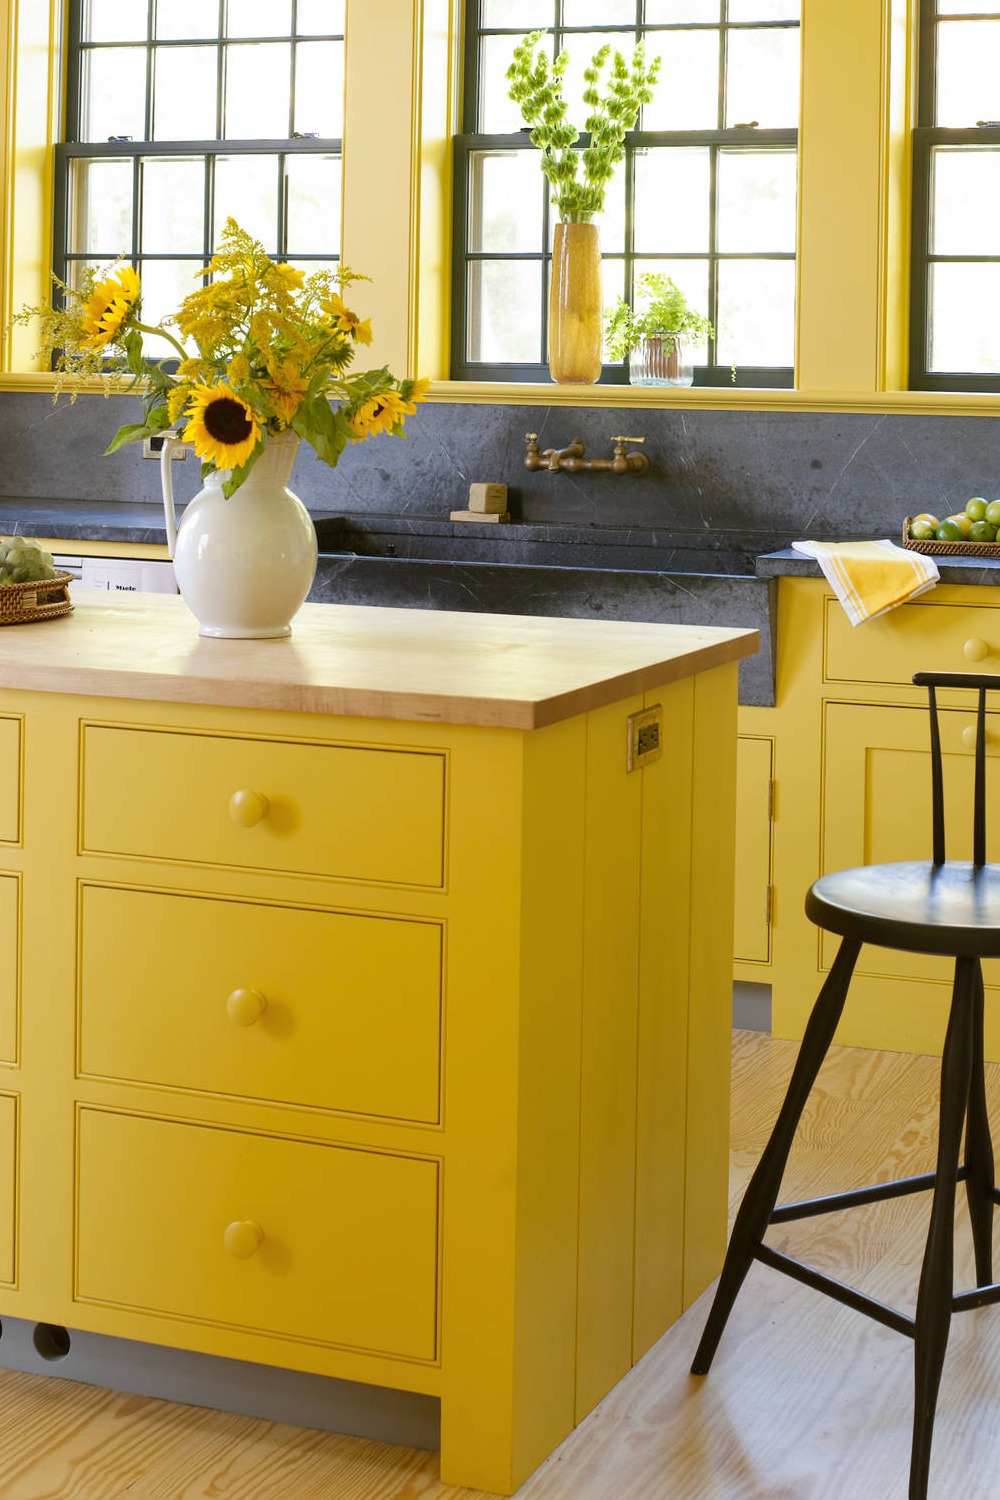 Yellow Painted Kitchen Cabinets Traditional Kitchen Island Cabinet Colors Bright Shades Flooring